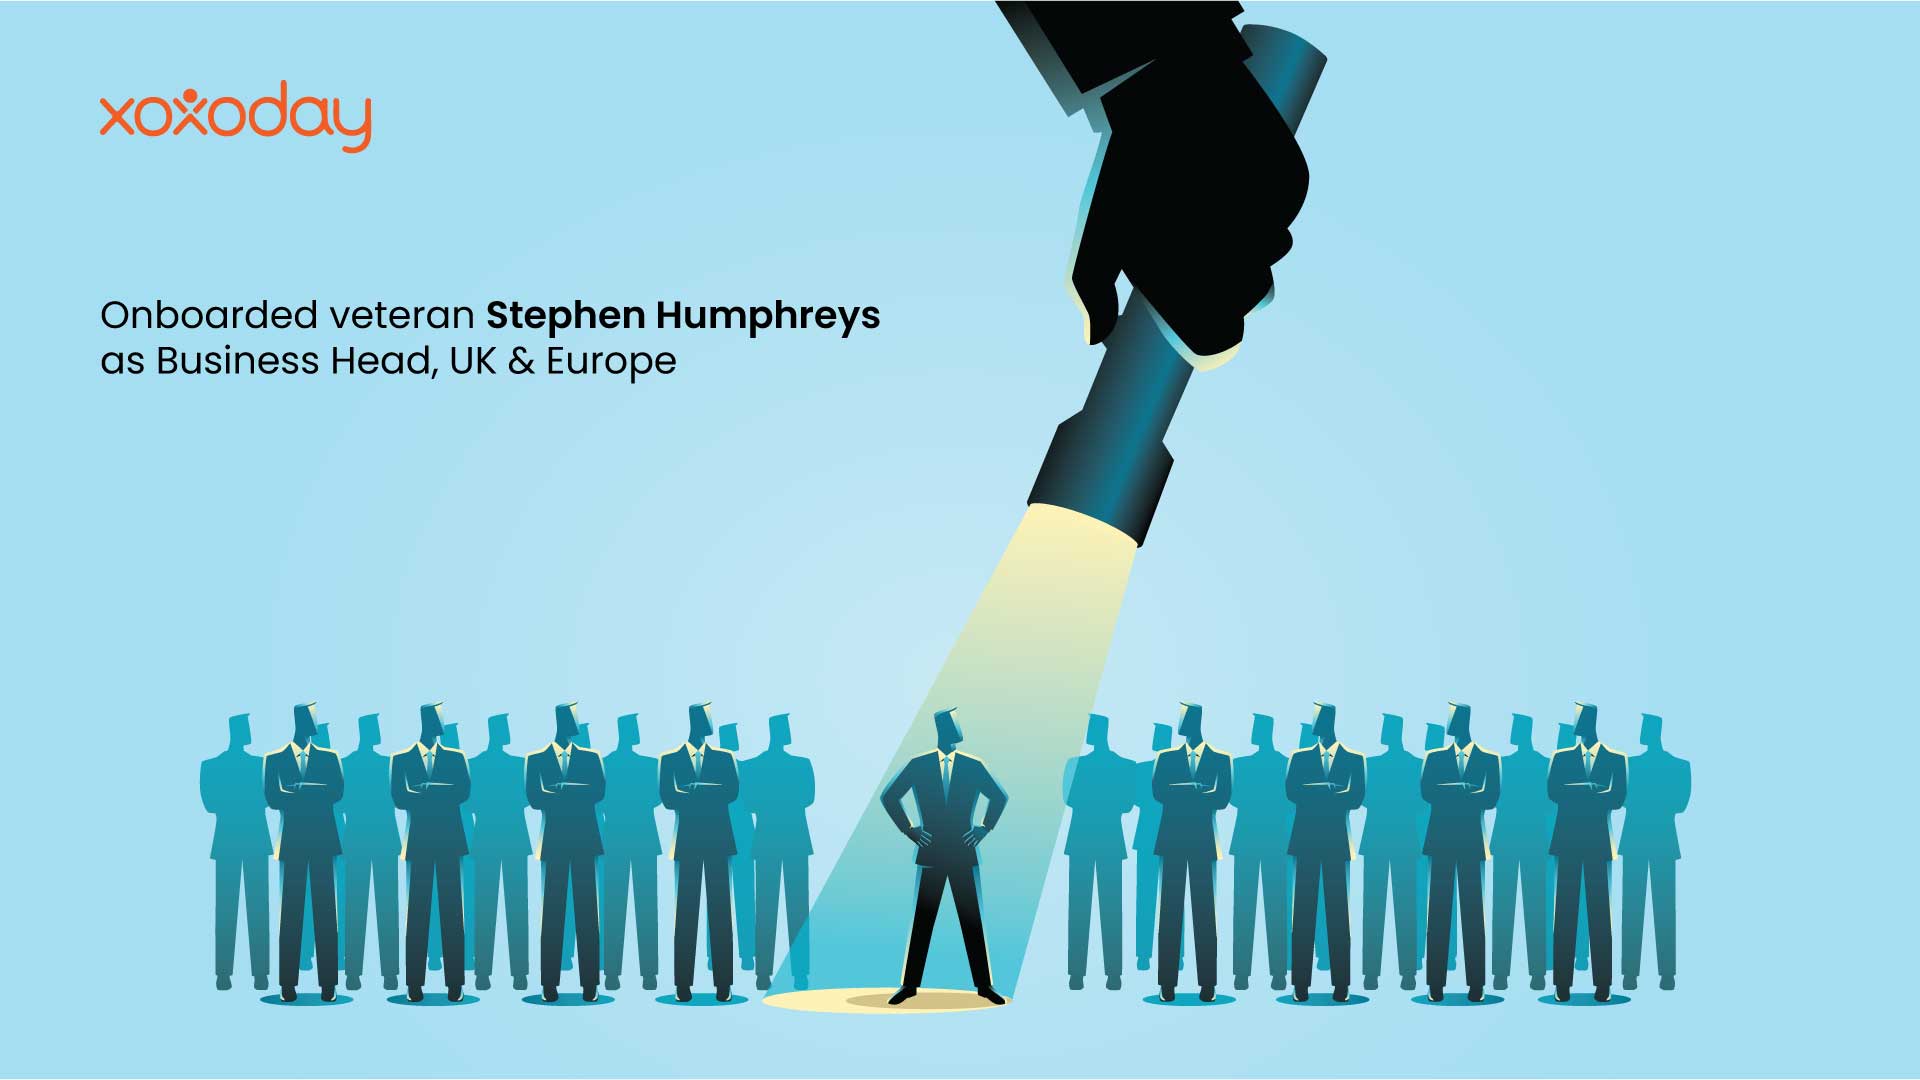 Customers in UK & Europe poised for elevated experience with new leadership at Xoxoday